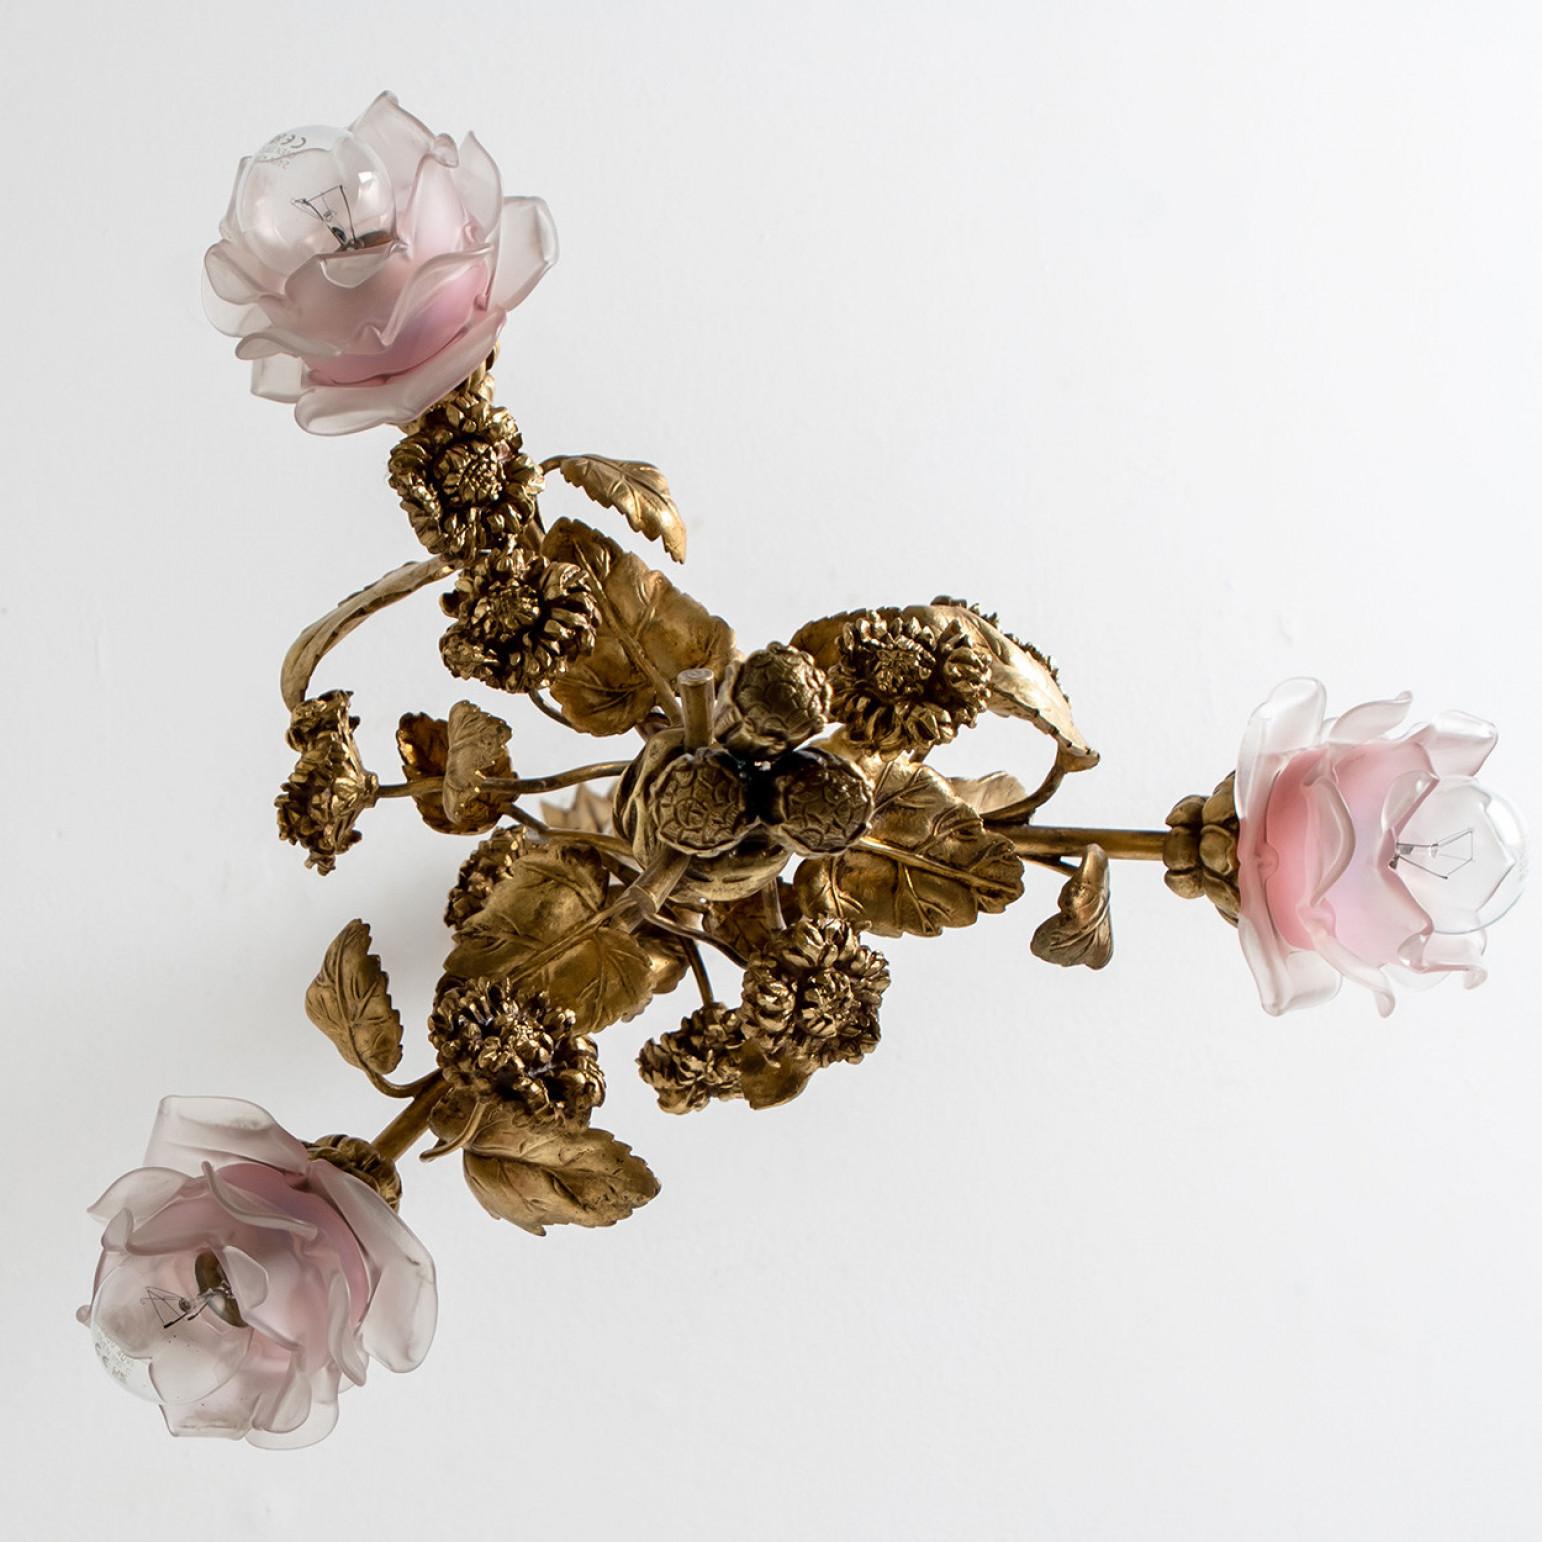 Exceptional and elegant gilt bronze and glass chandelier, Art Nouveau period, France, circa 1890.

With 3 wonderful glass roses with bayonet fitting and a handmade bronze flower bouquet.

A real state of art piece from the 19th century.

In very